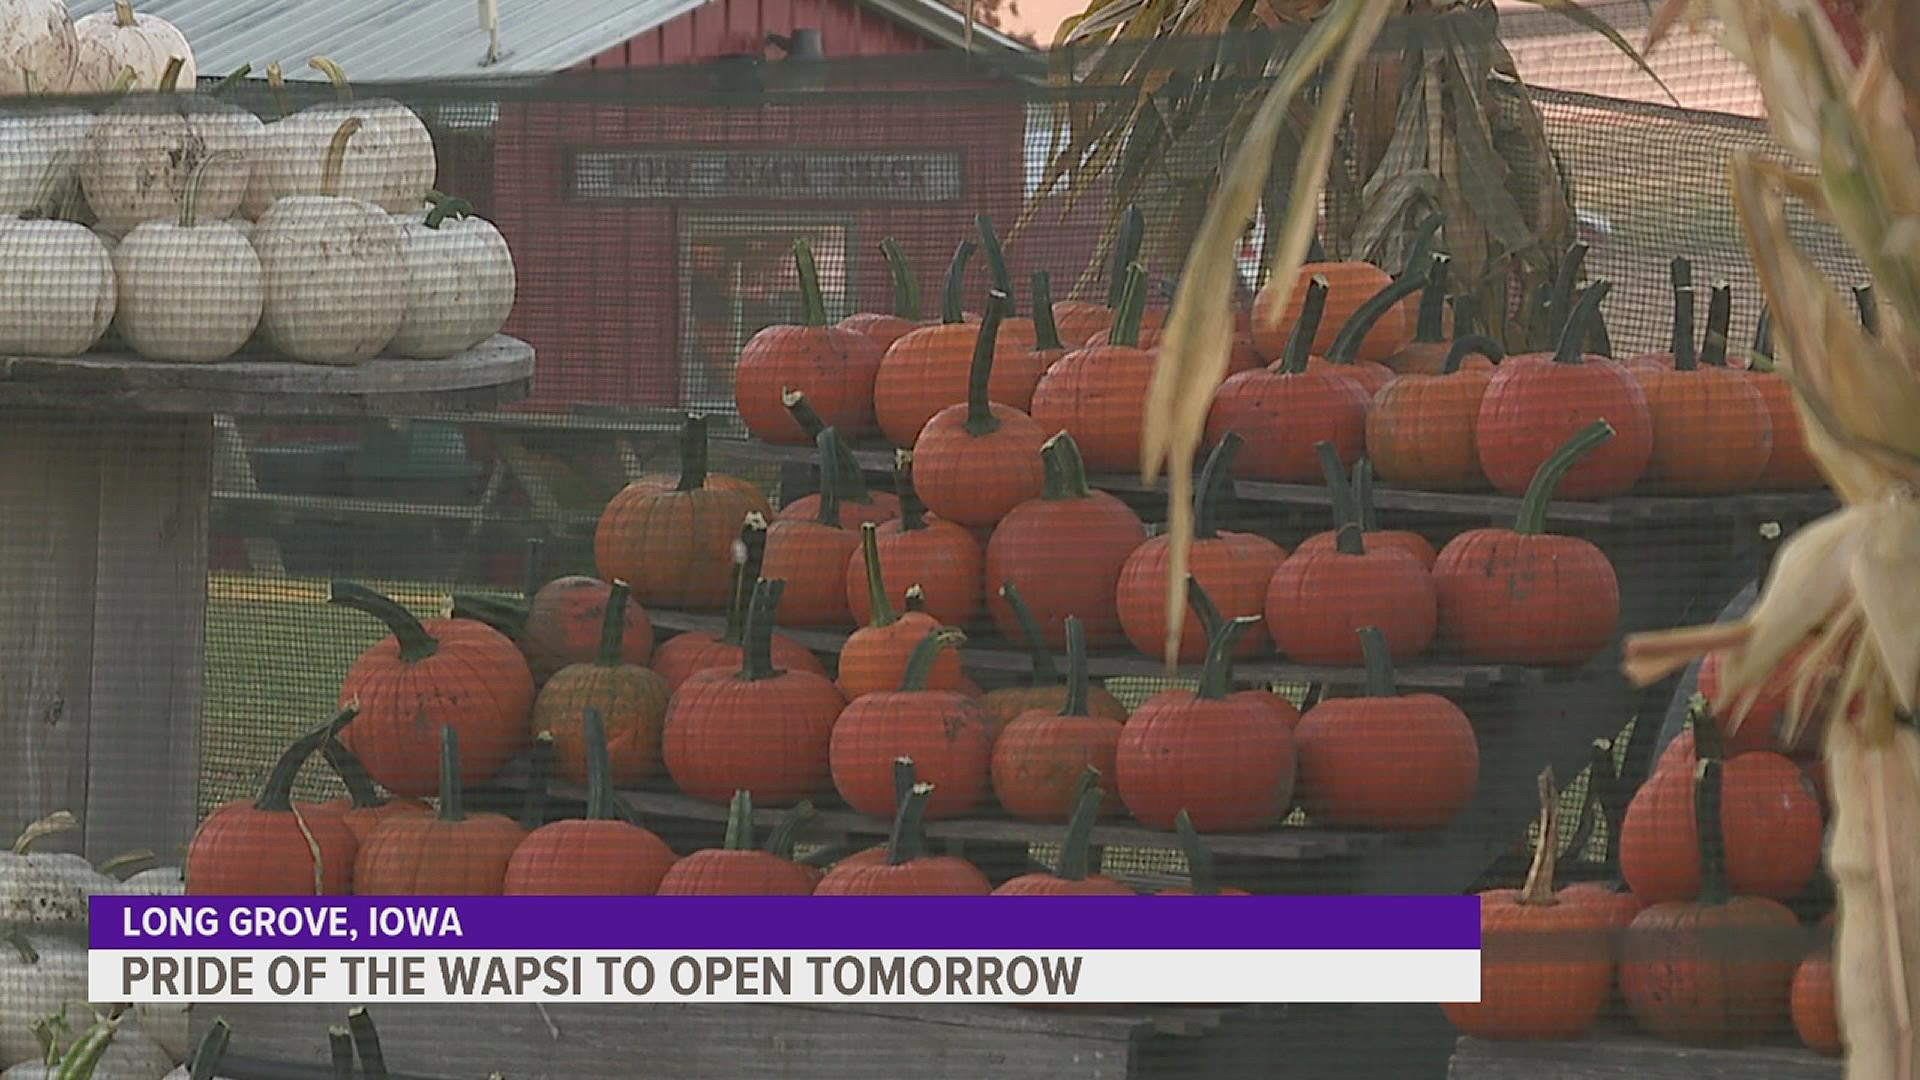 The Long Grove, Iowa pumpkin patch is welcoming visitors back on Oct. 1, with revamped attractions and a new coat of paint.